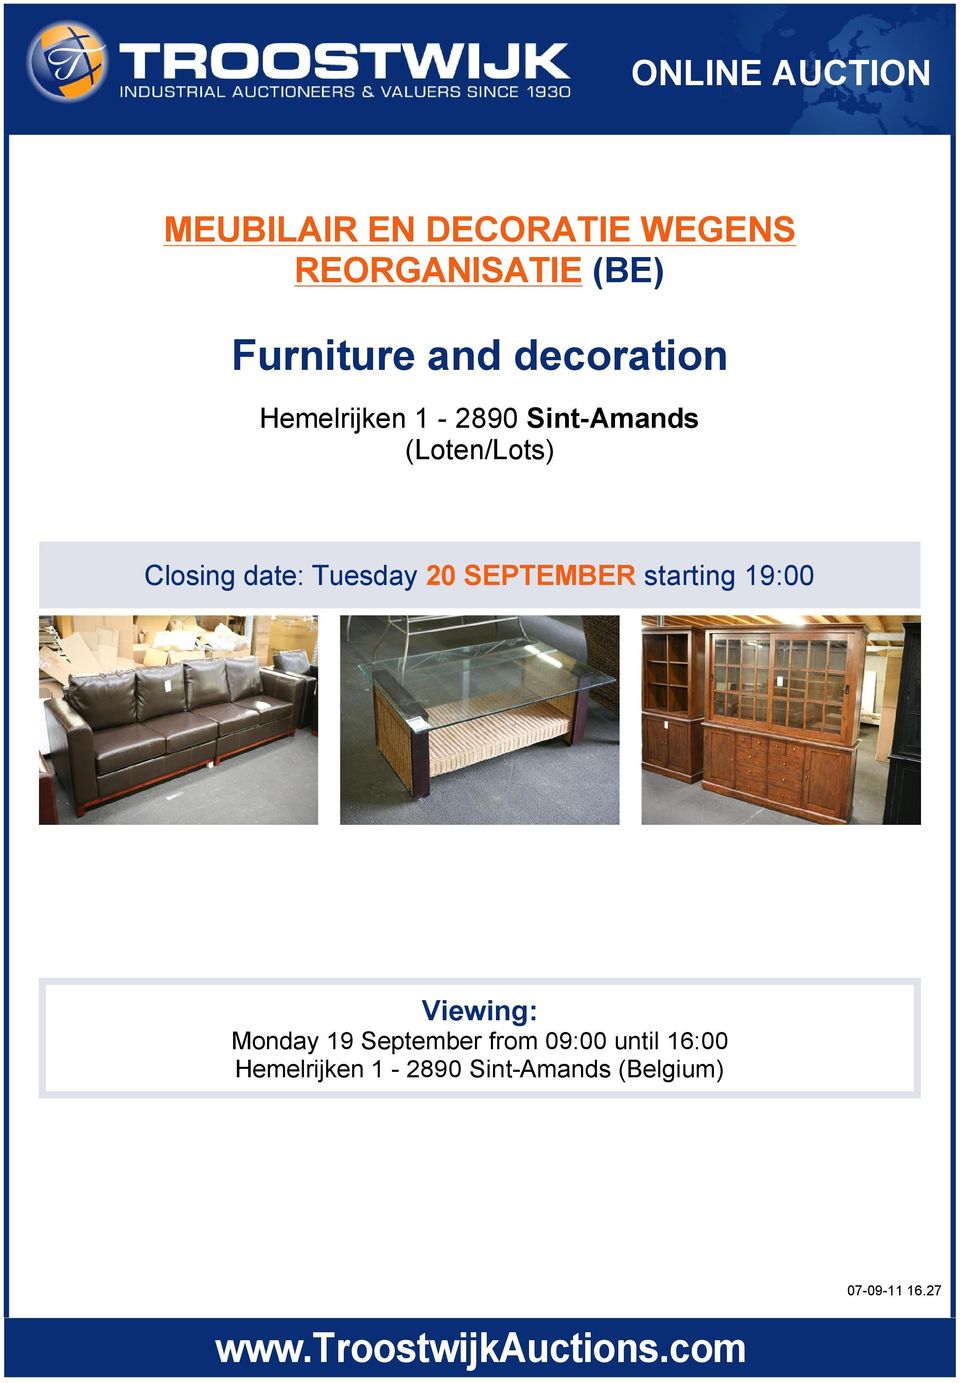 SEPTEMBER starting 19:00 Viewing: Monday 19 September from 09:00 until 16:00